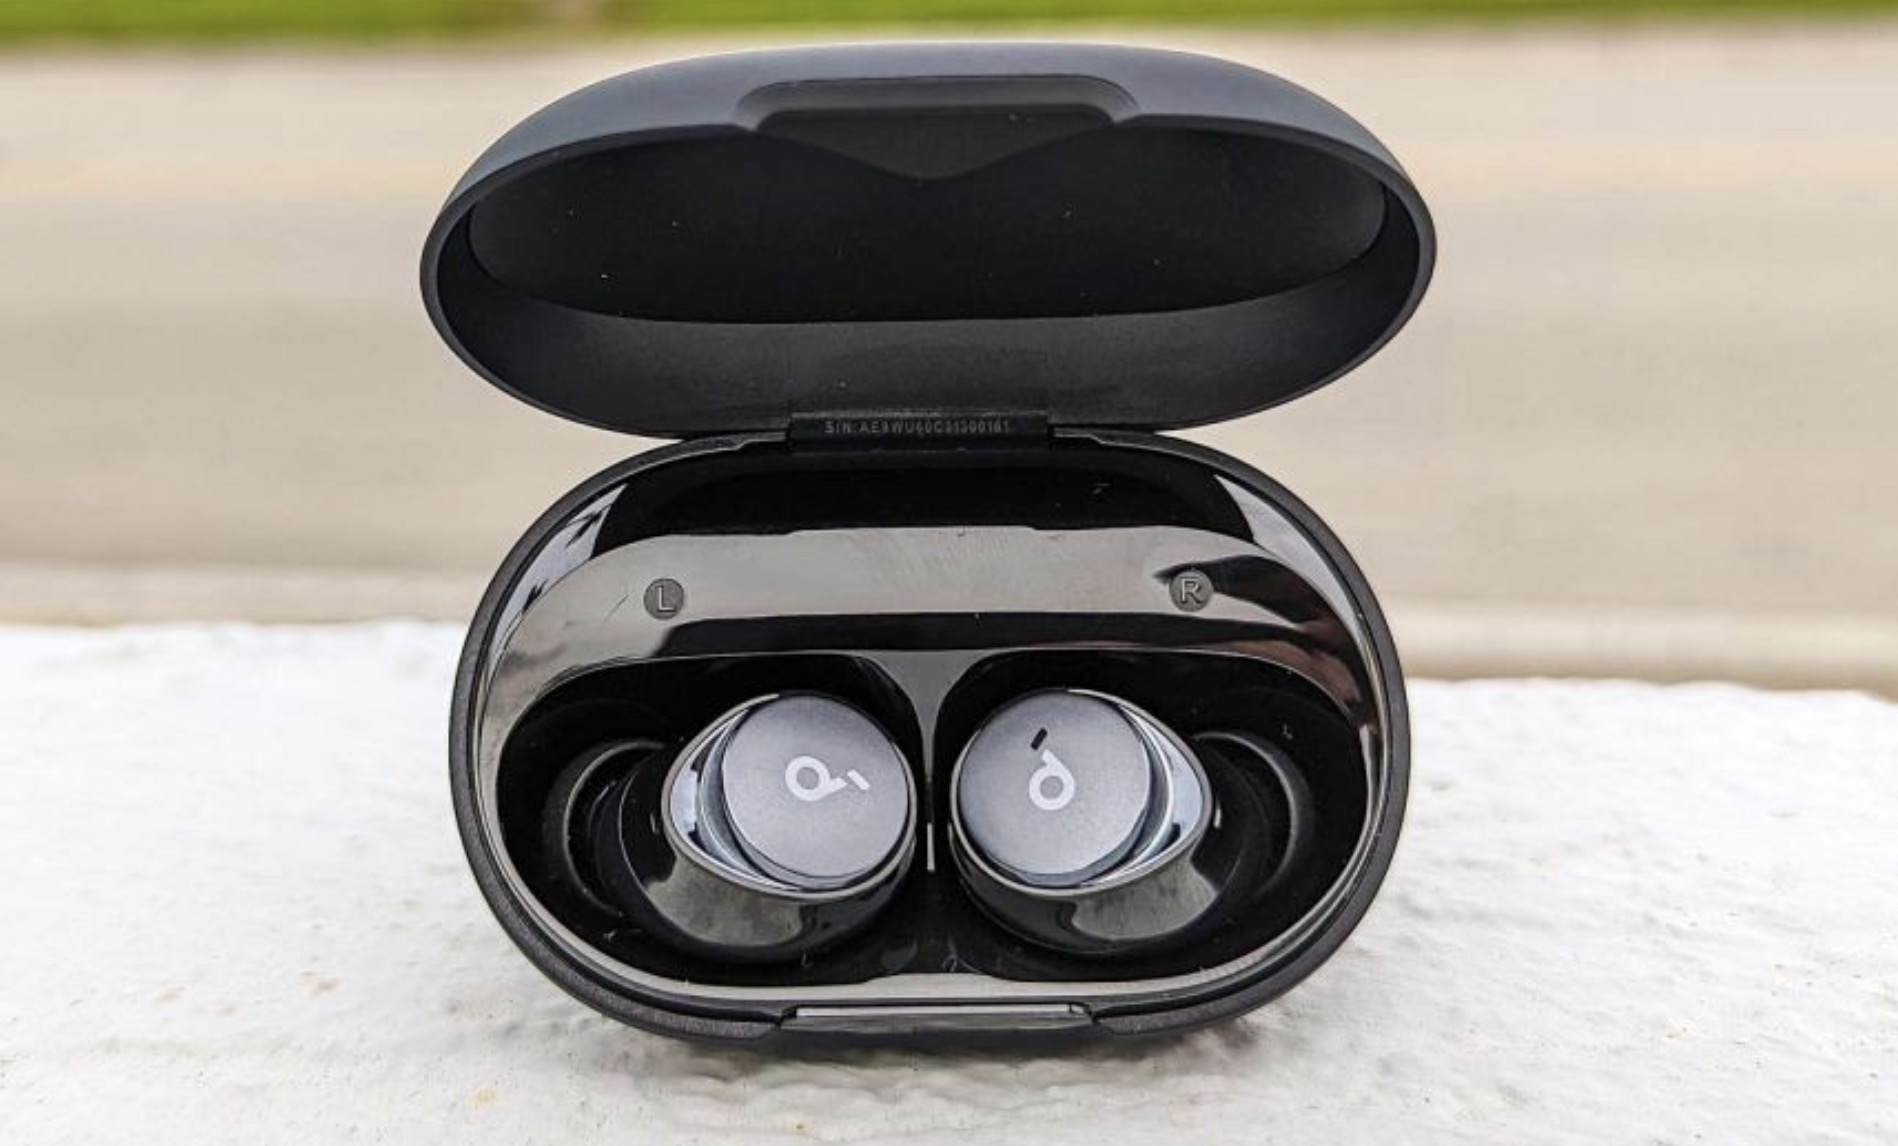 Top 5 Wireless Earbuds to buy in 2023